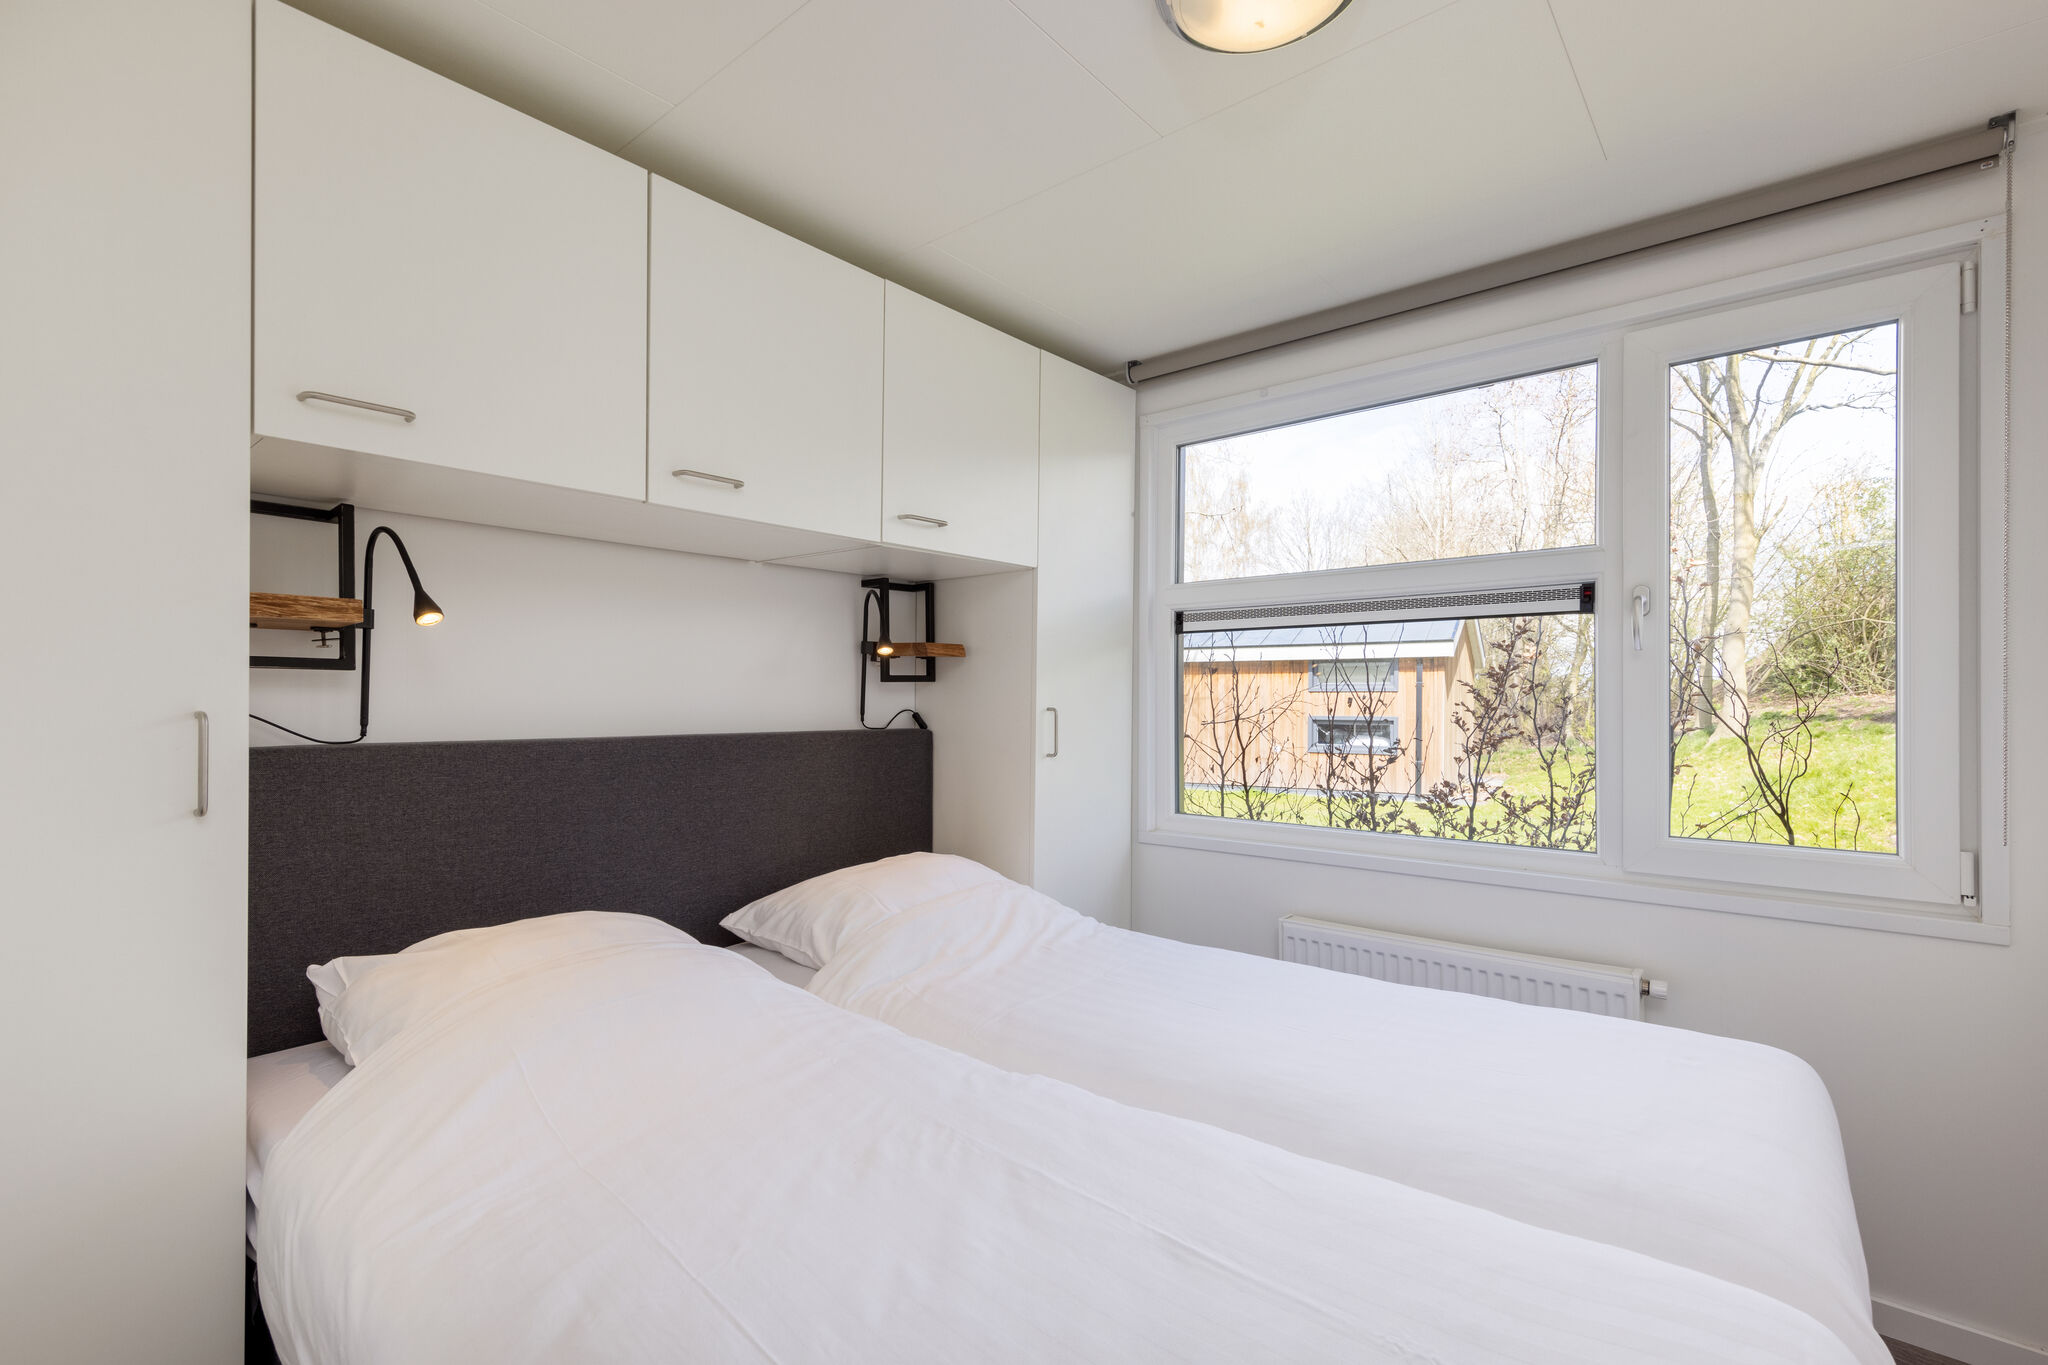 Modern lodge with air conditioning, in green Twente